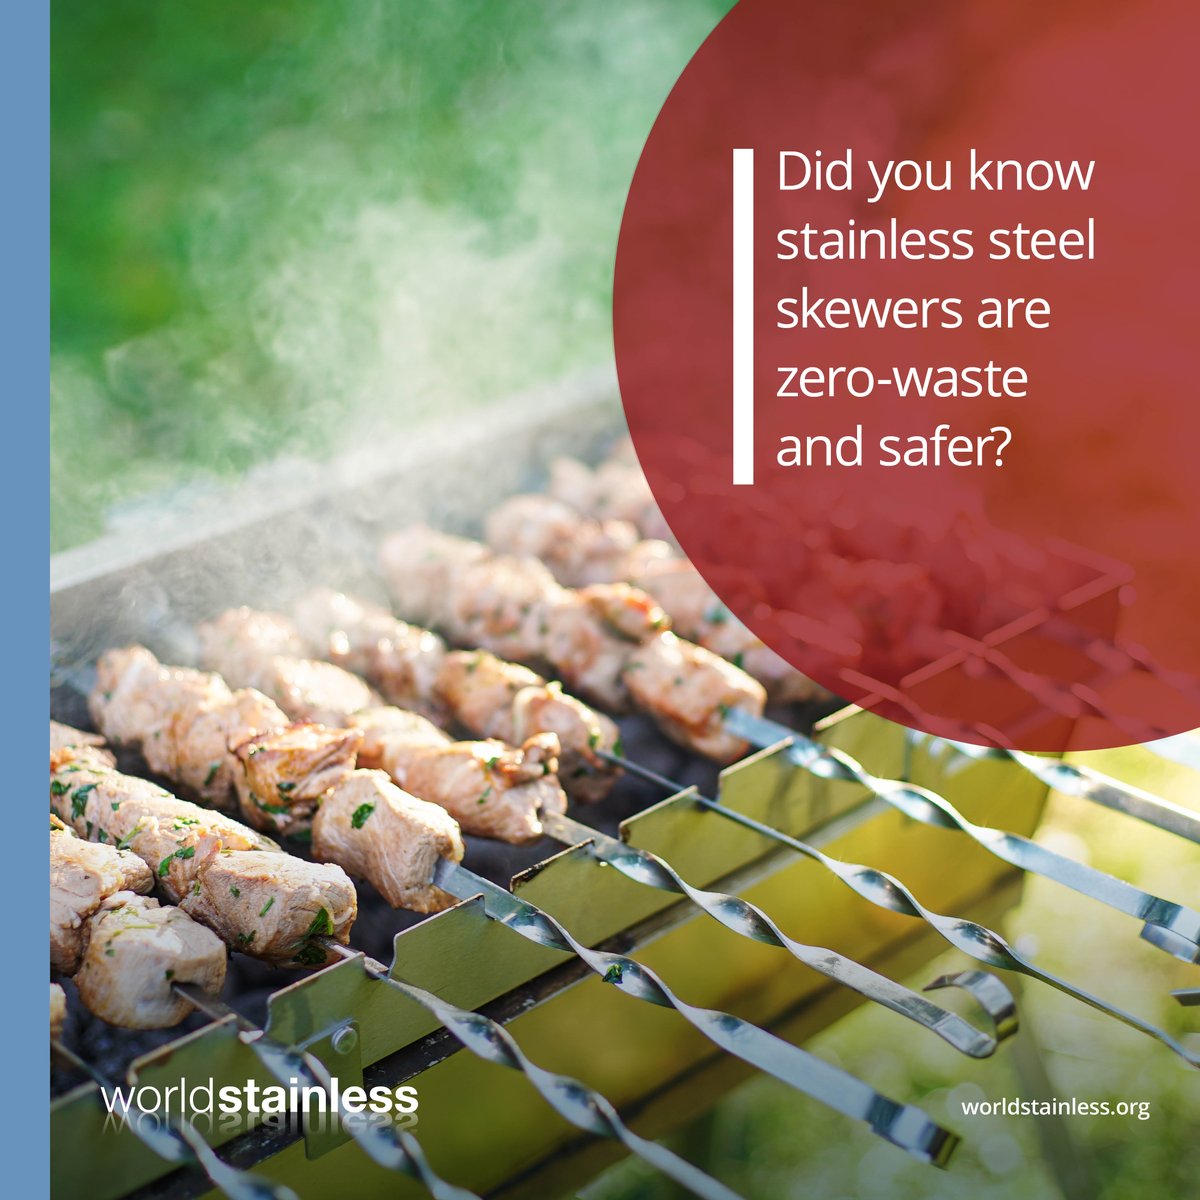 Using #stainlesssteel skewers for your barbecue meat does not only mean you have less waste, it is also a safer option from a food safety perspective.
ow.ly/sAXN50RFqRN
#stainlesssteels #stainlesssteelSkewer #barbecue #NationalBarbecueDay #zeroWaste #foodSafety